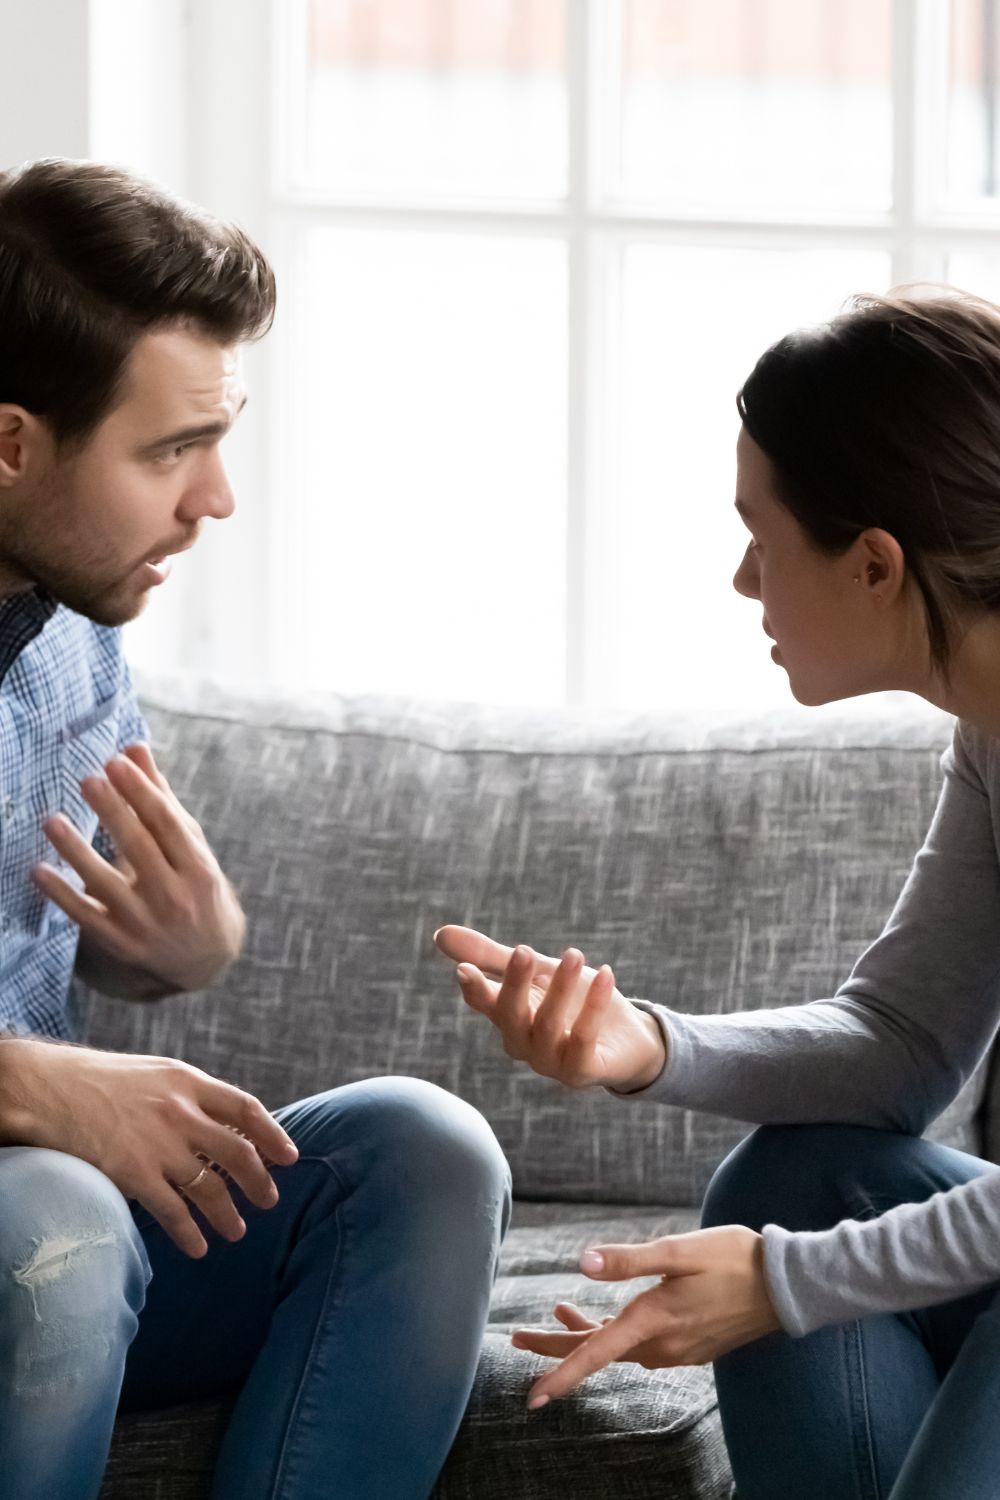 Signs your marriage will survive infidelity